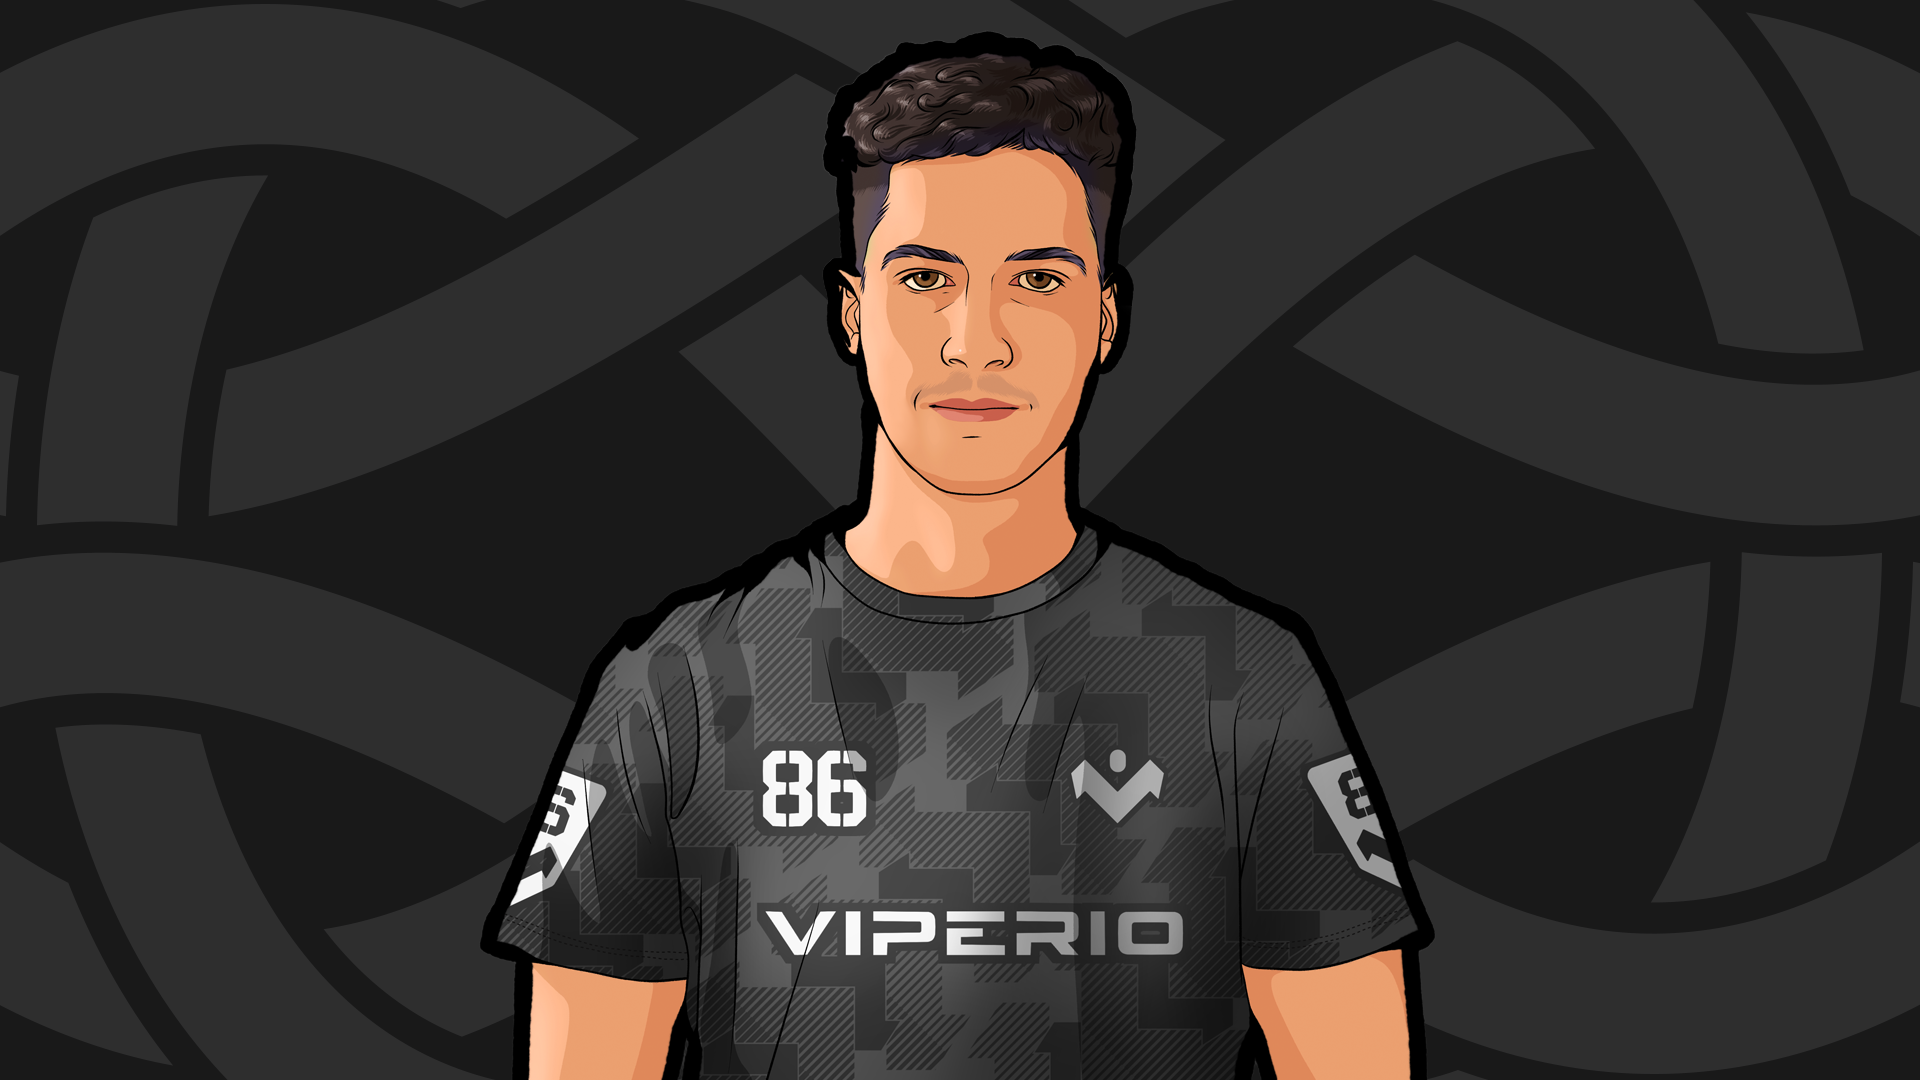 Viperio 86 to part ways with Draw